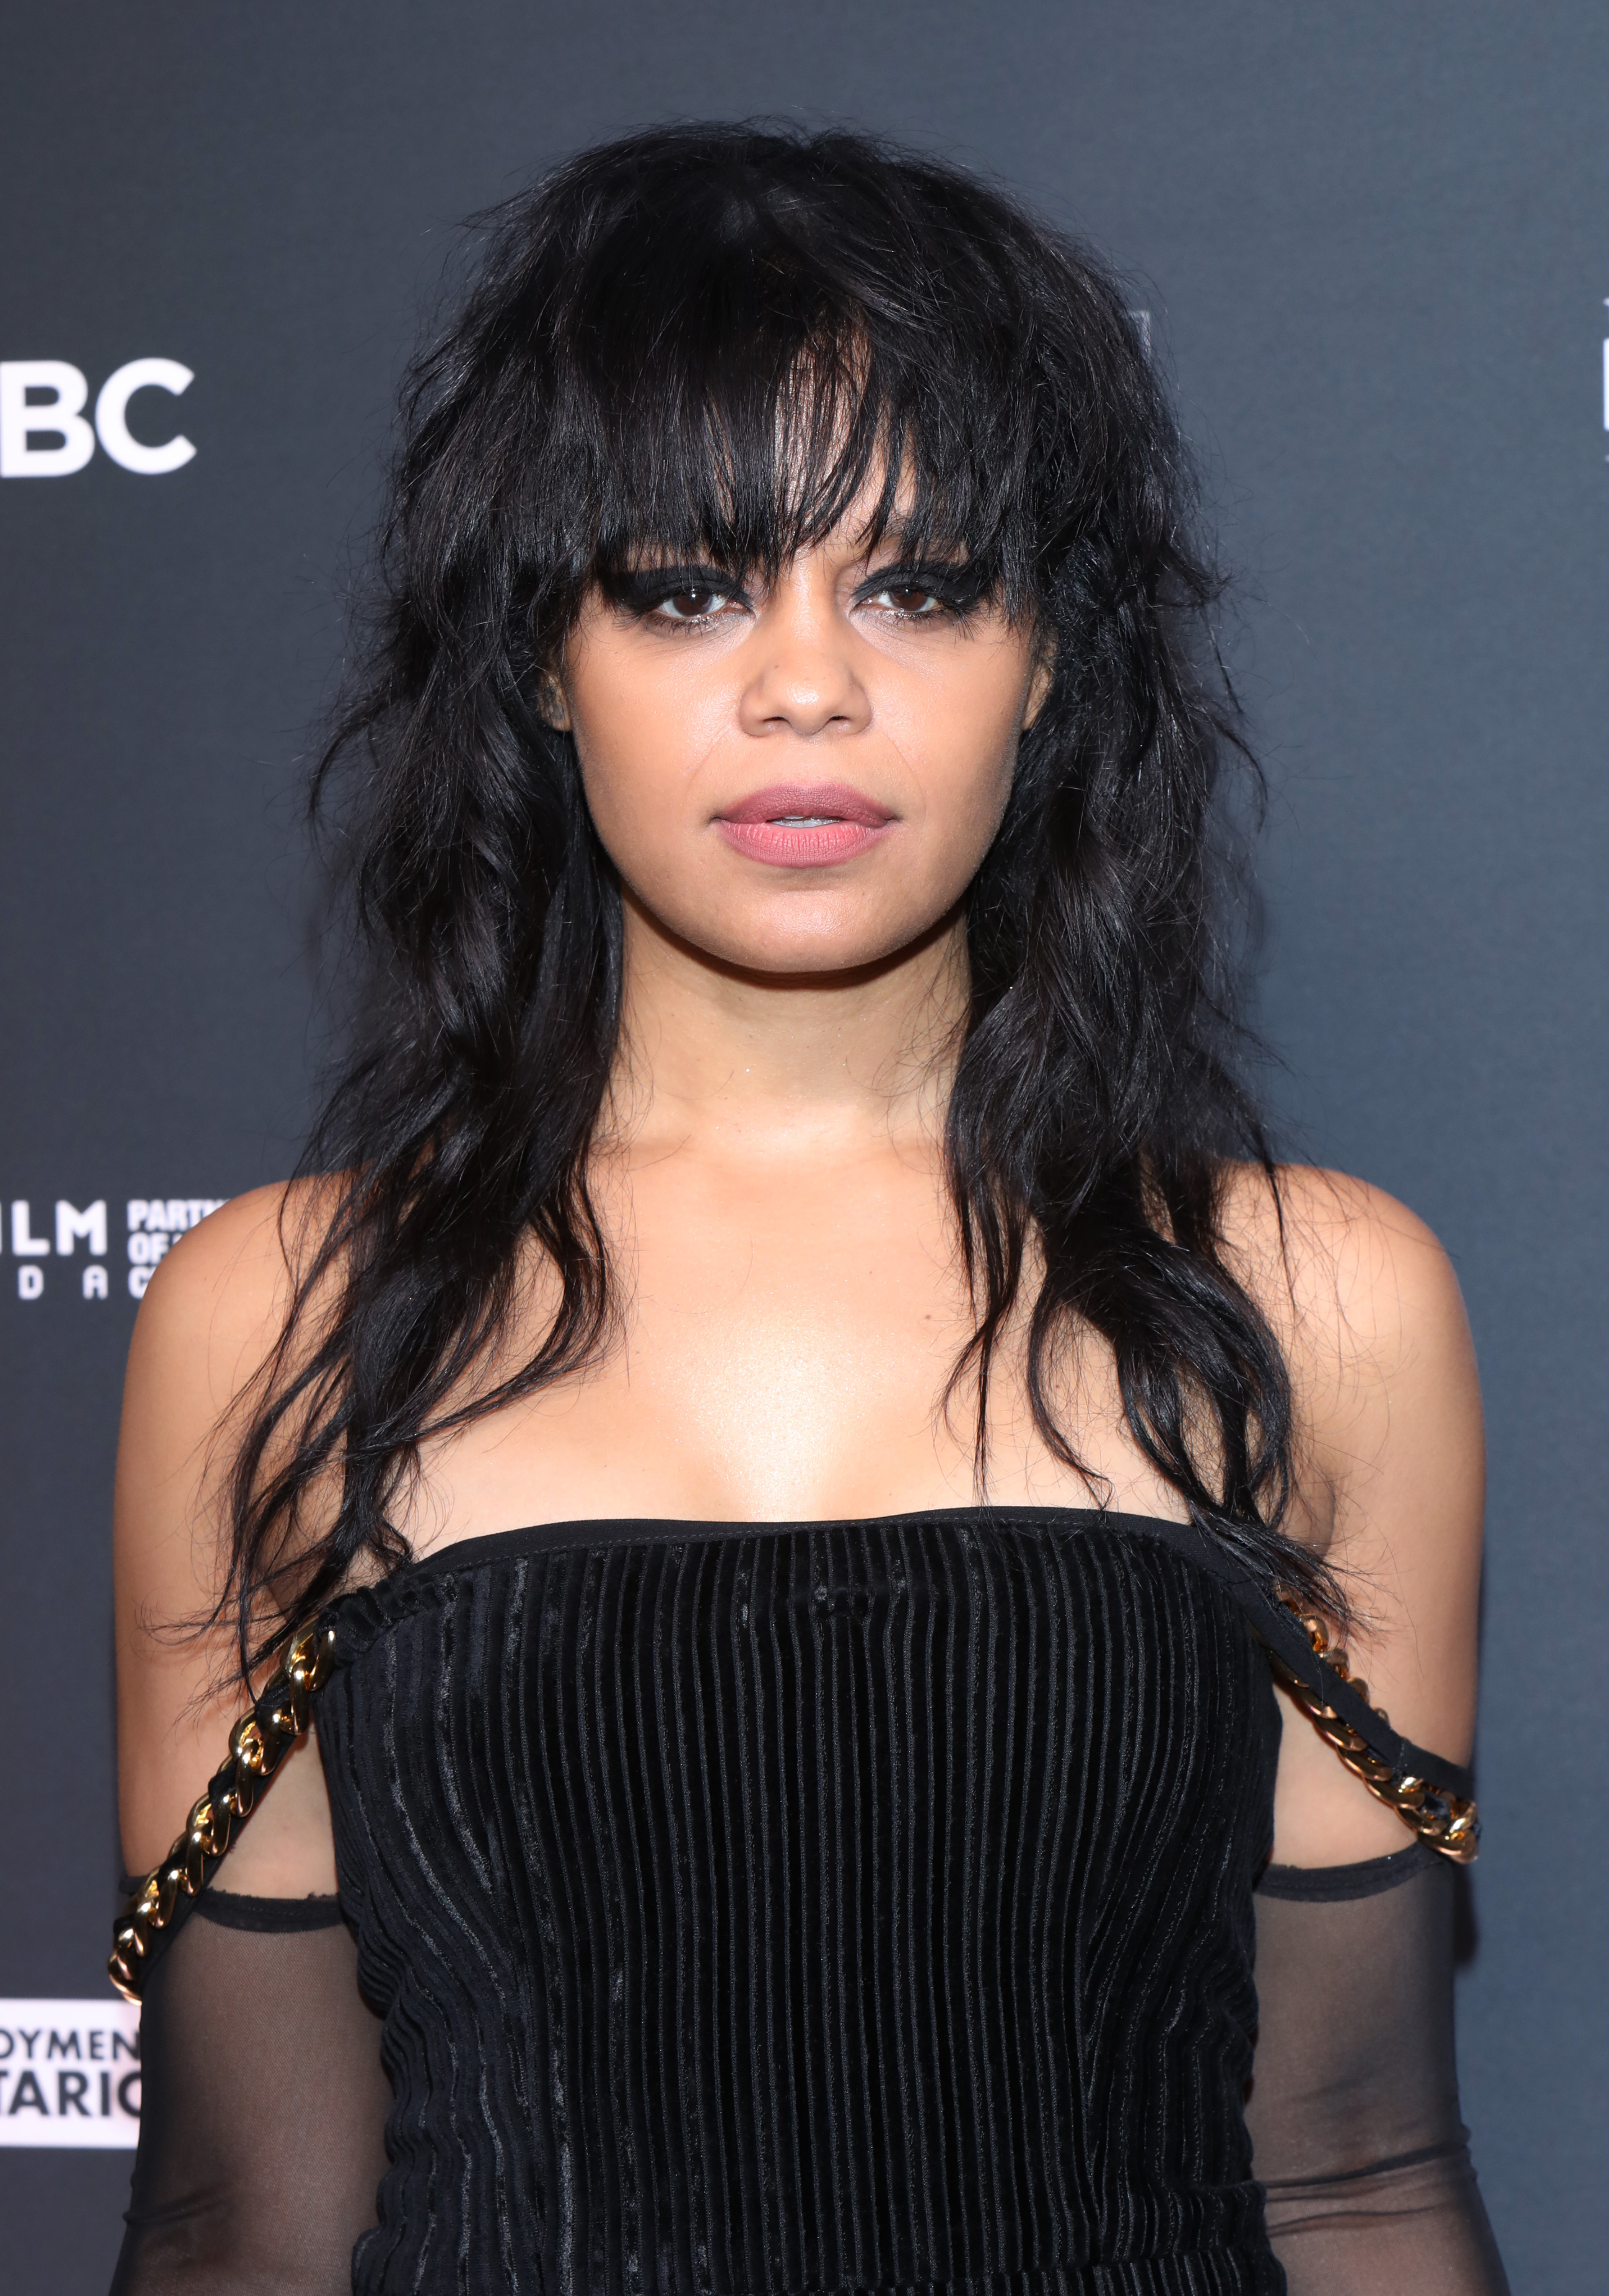 Fefe Dobson poses at The Legacy Awards 2022 at History on September 25, 2022, in Toronto, Ontario | Source: Getty Images